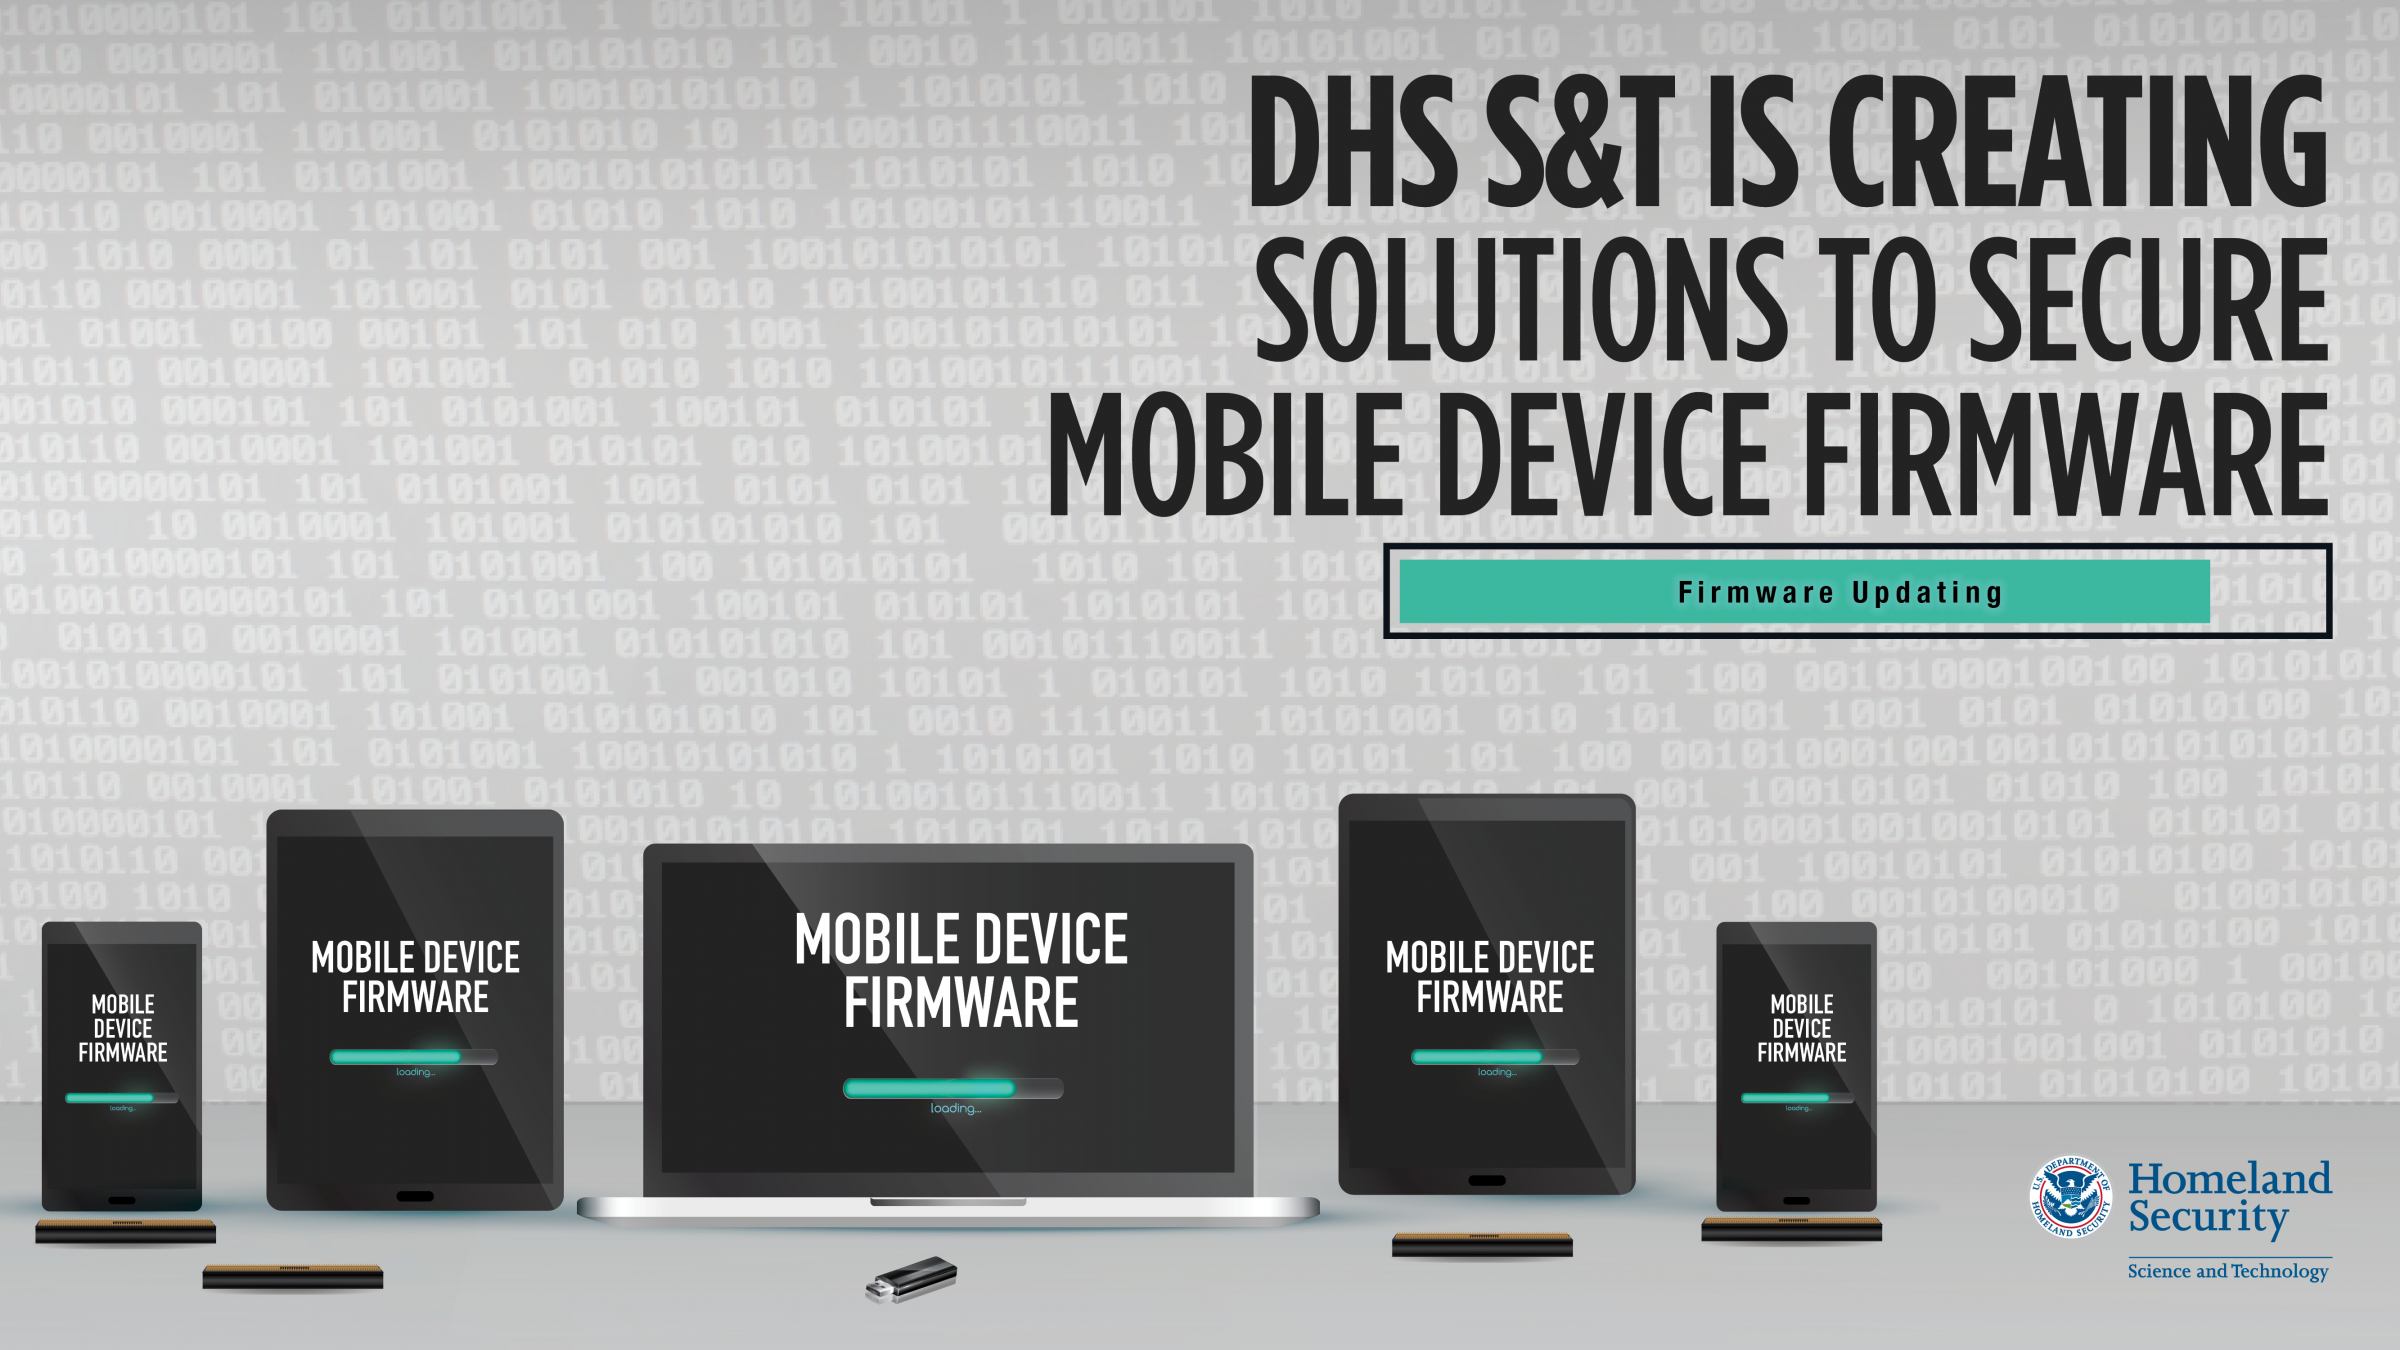 DHS S&T is creating solutions to secure Mobile device firmware